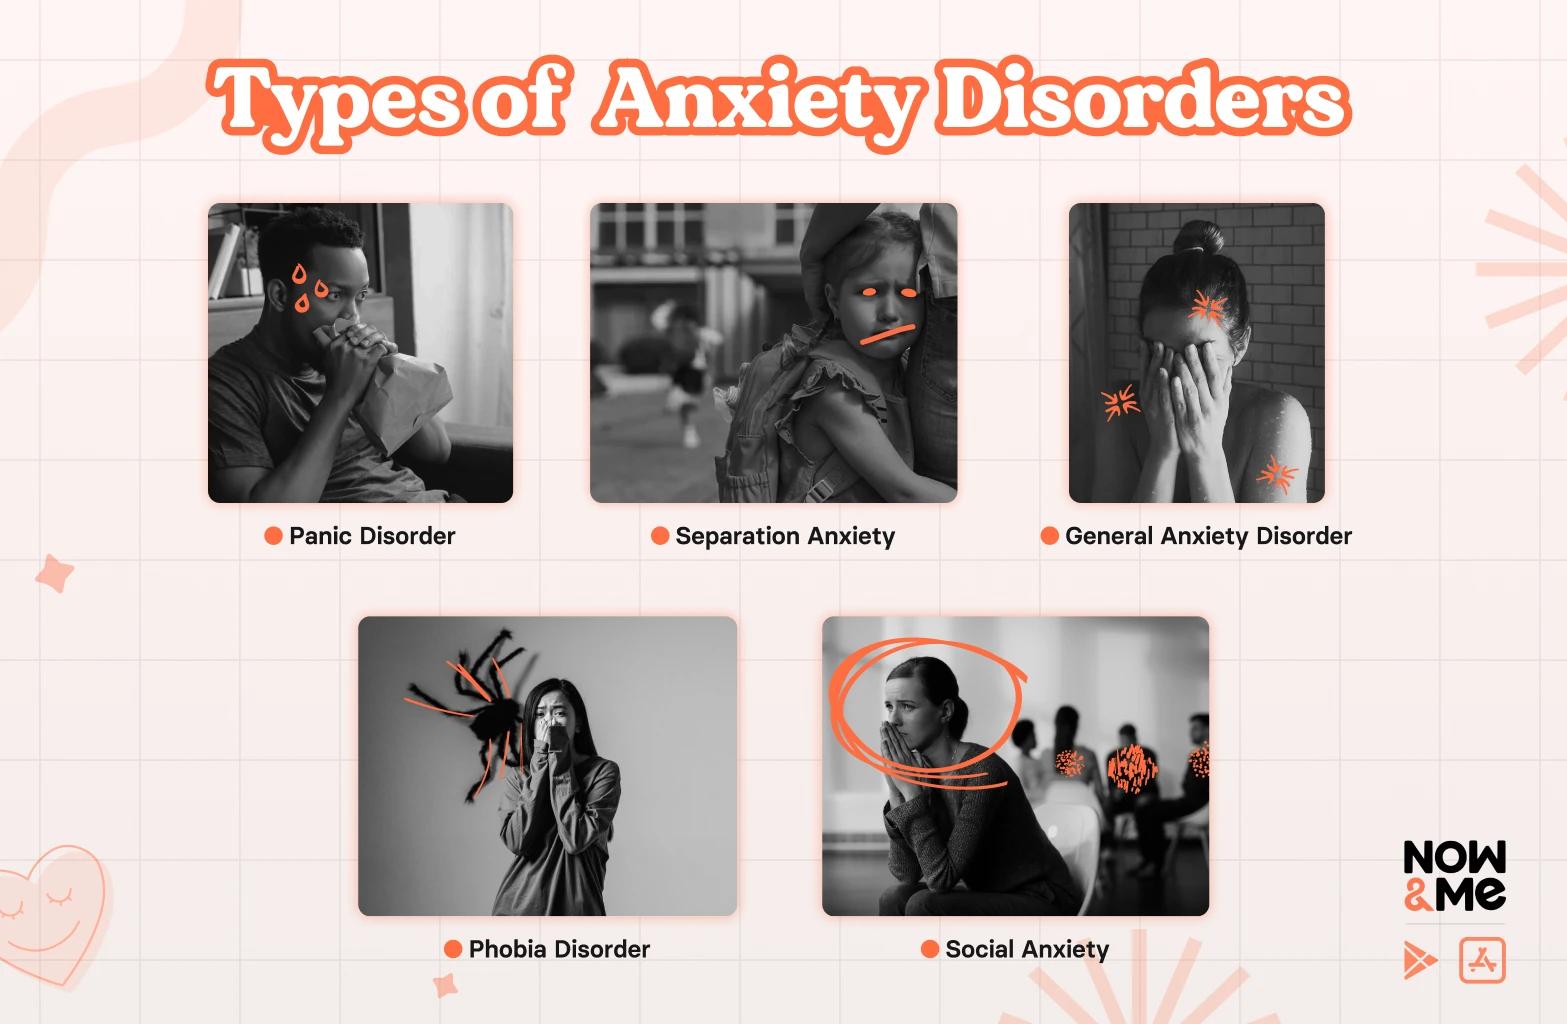 types of anxiety disorders